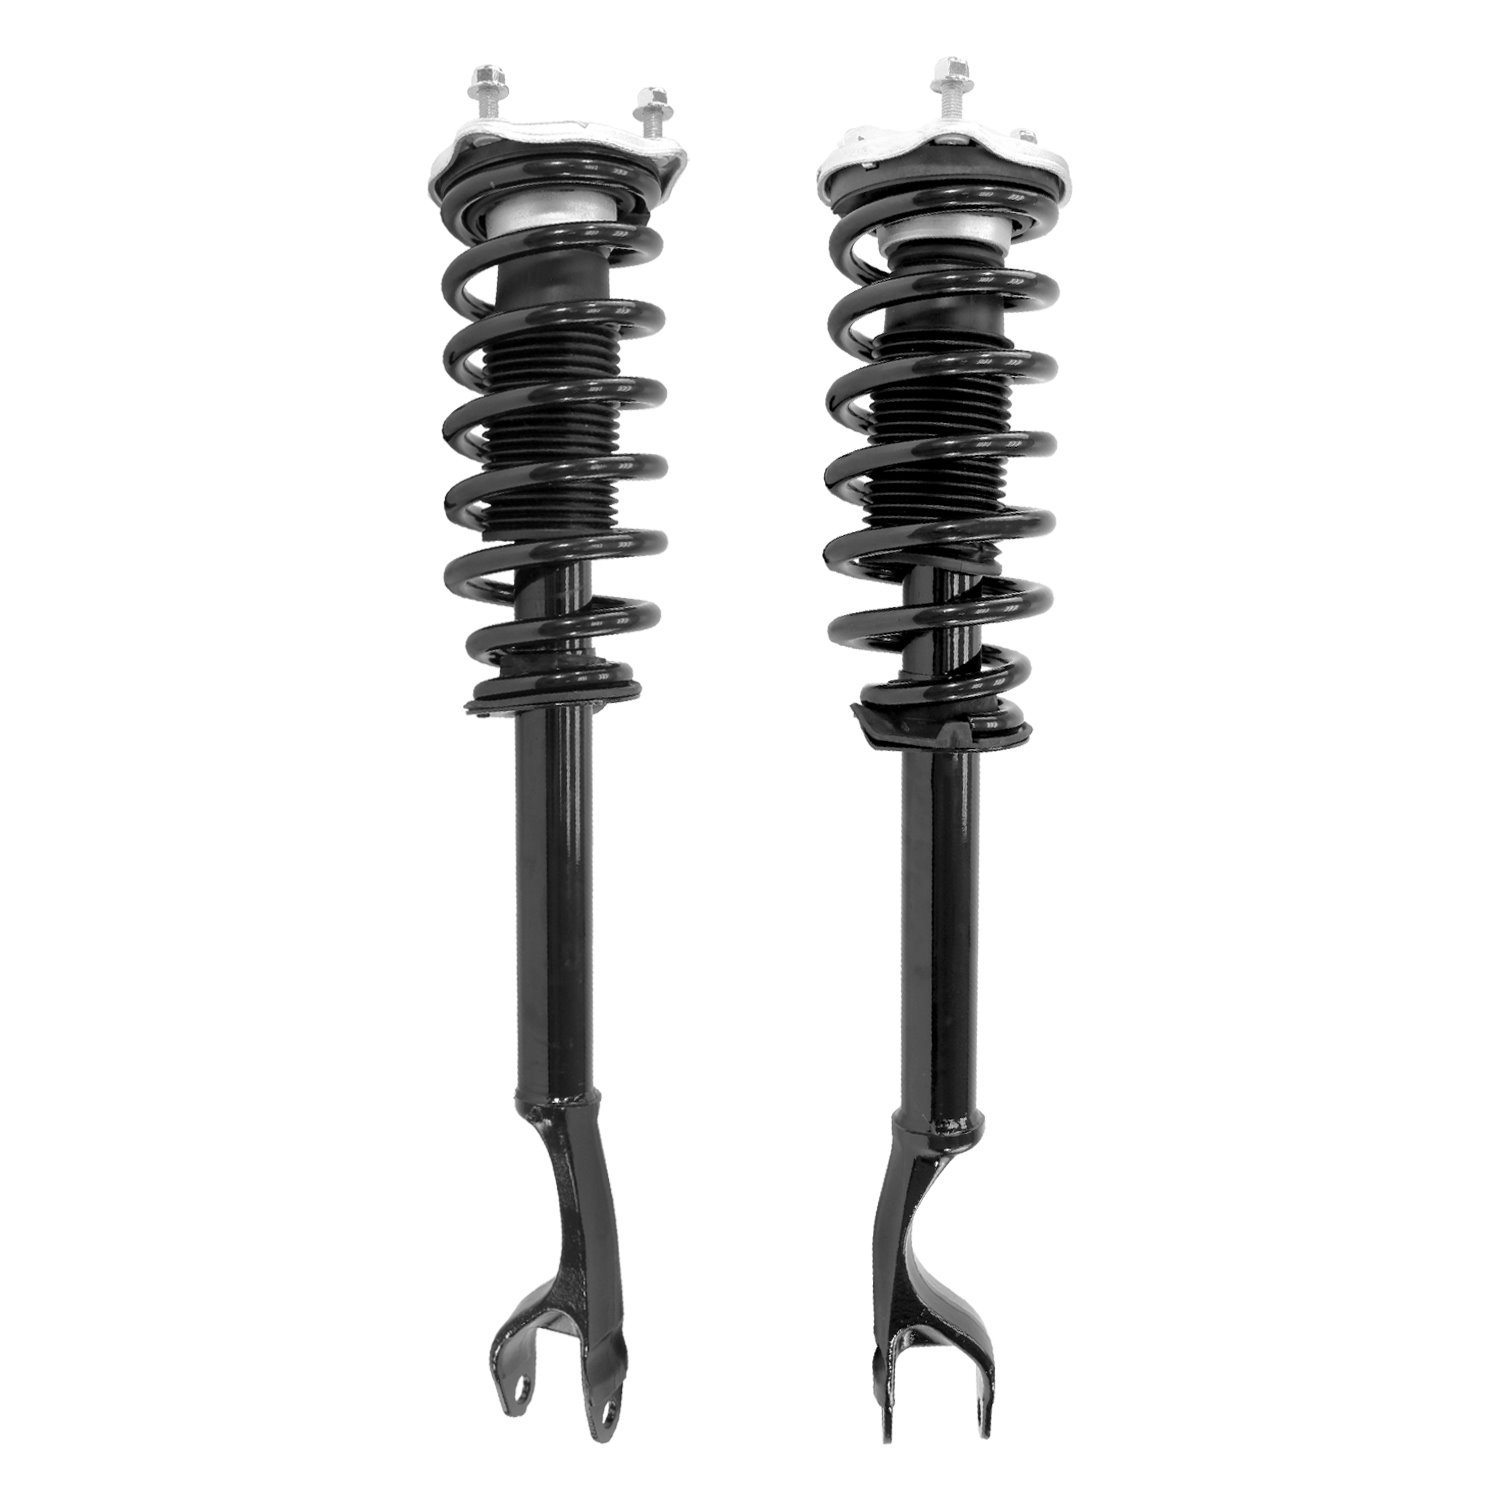 2-13471-13472-001 Front Suspension Strut & Coil Spring Assemby Set Fits Select Mercedes-Benz